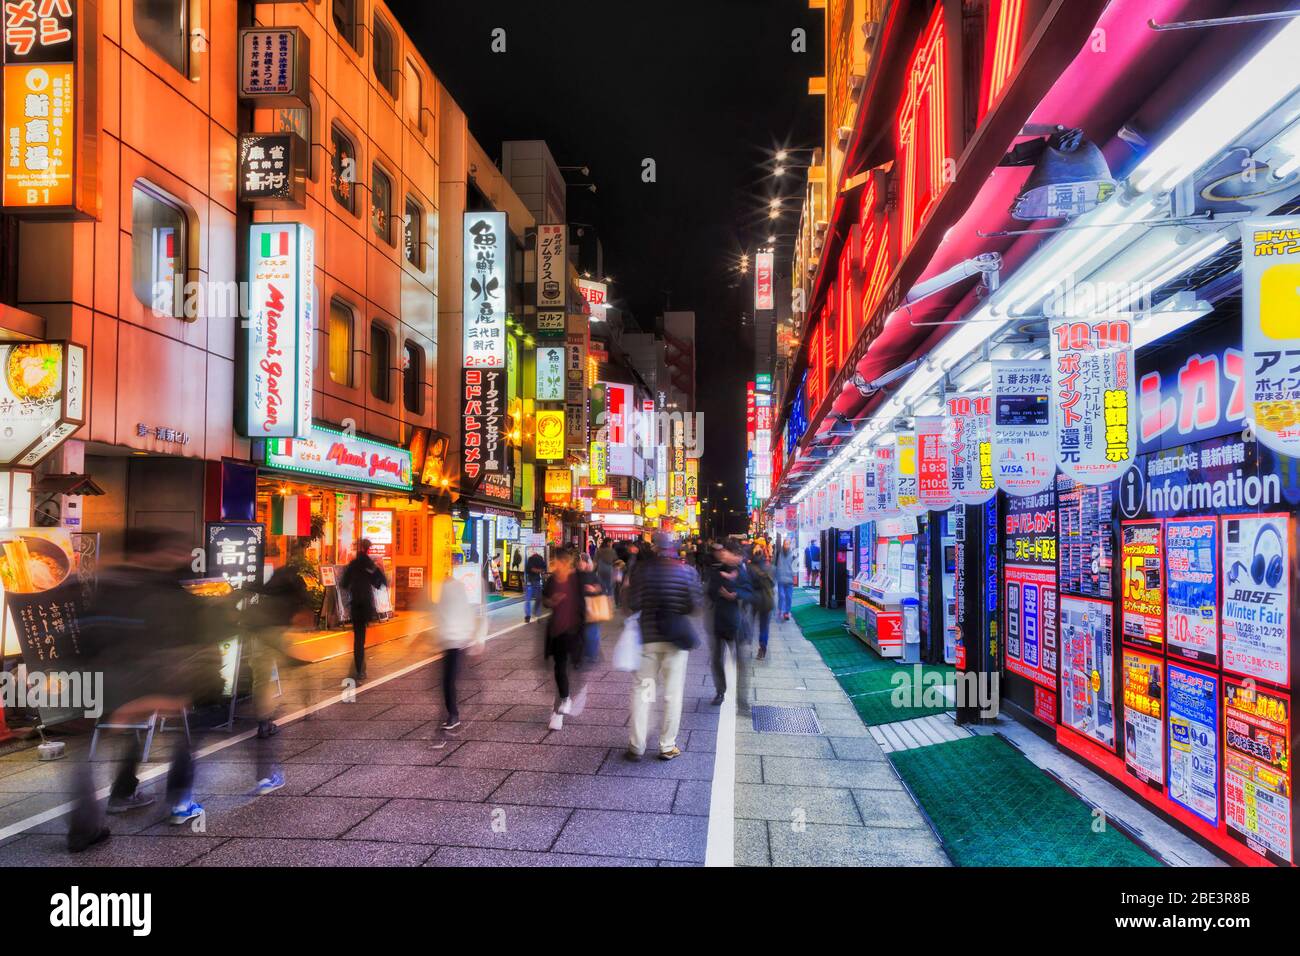 Japan, Tokyo, 31 Dec 2019: Busy shopping street in Shinjuku Kabuki-cho district of Japanese capital at night with bright ads and lights. Stock Photo